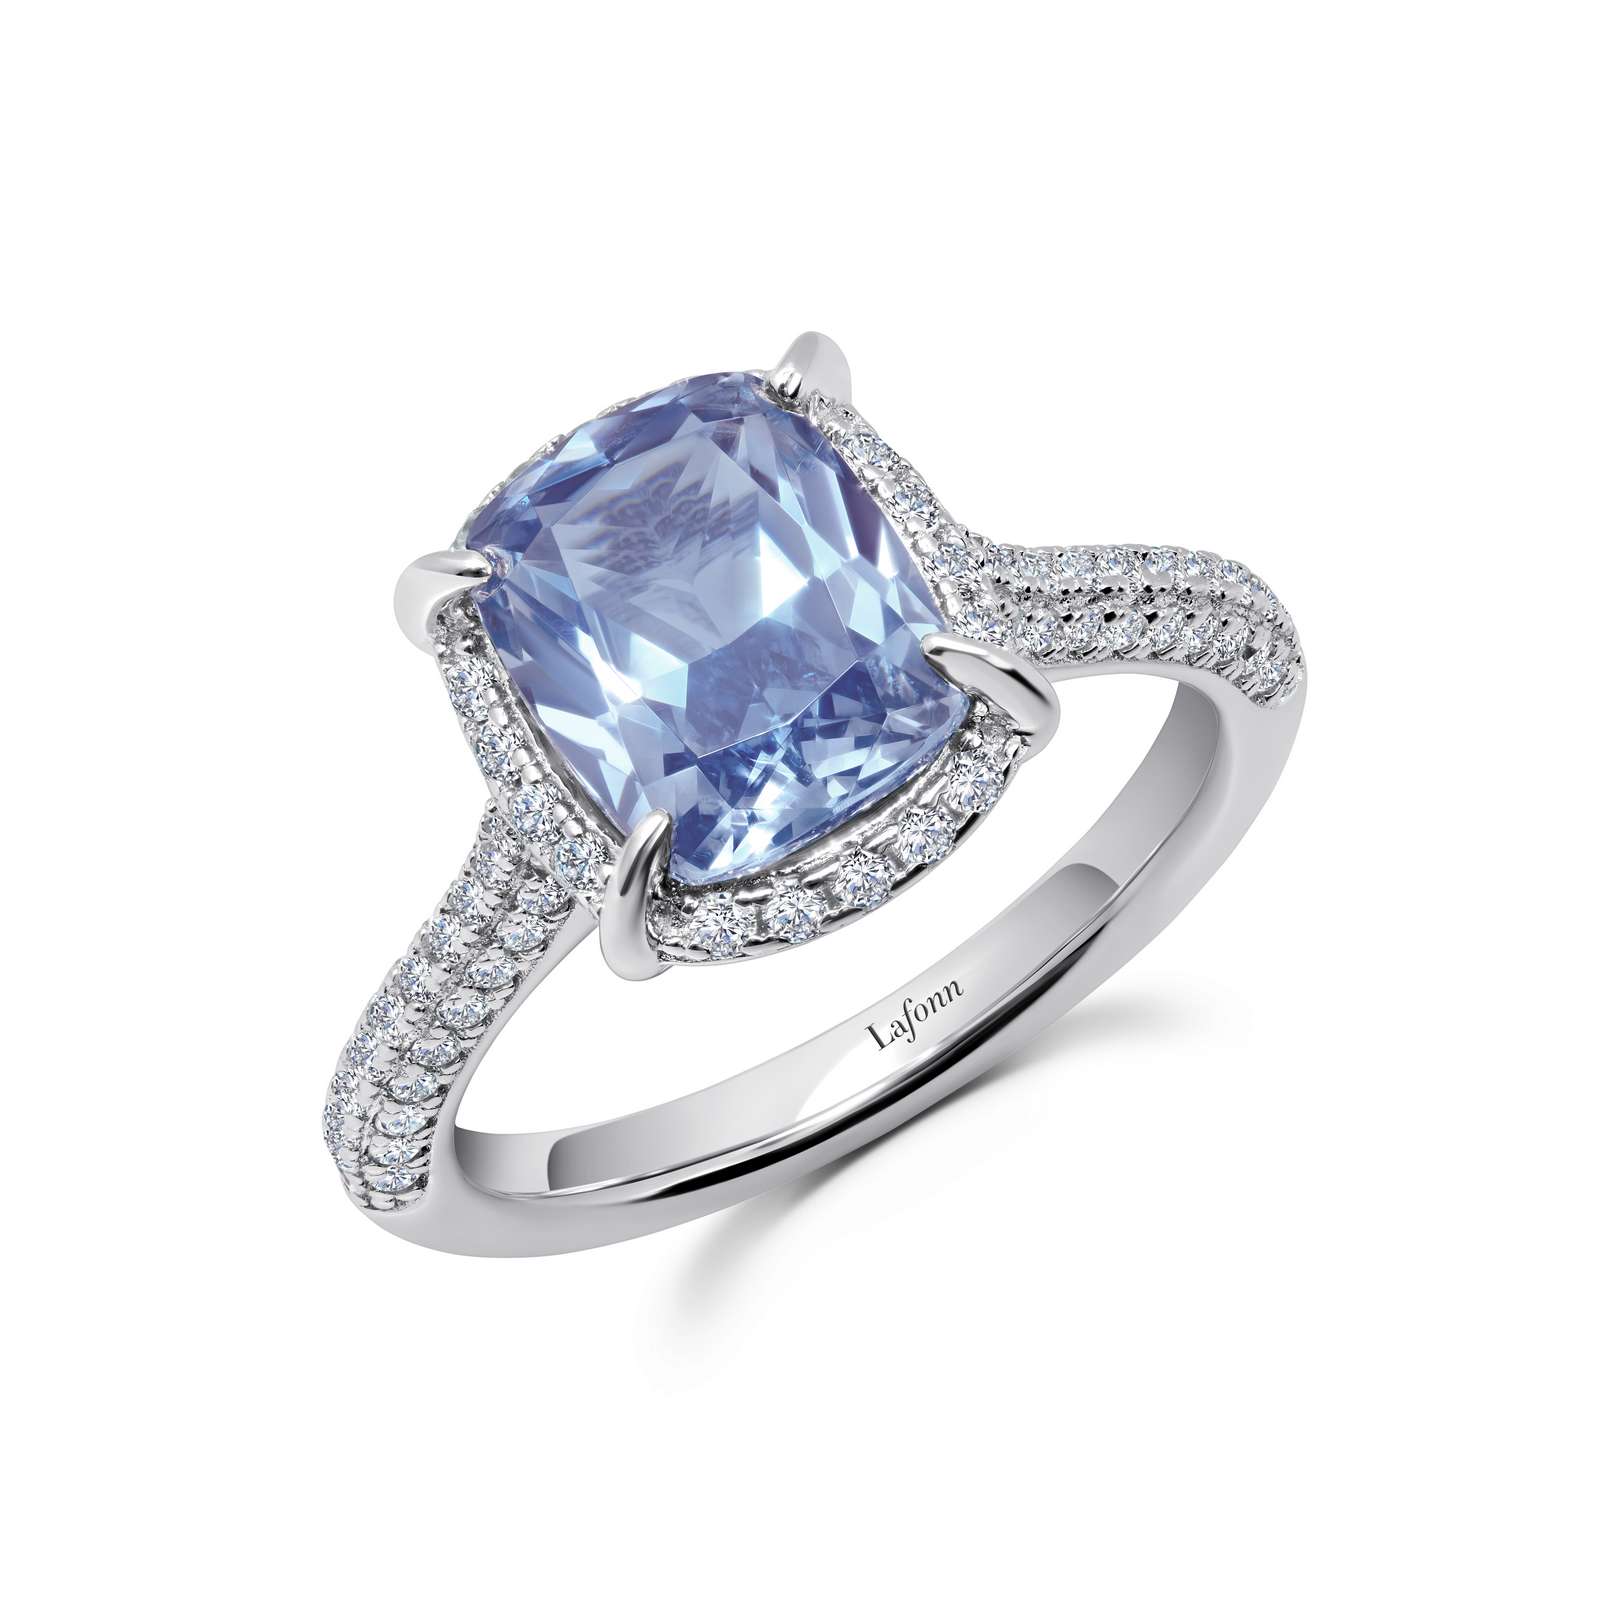 Classic Simulated Diamond And Aquamarine Platinum Bonded Ring Griner Jewelry Co. Moultrie, GA